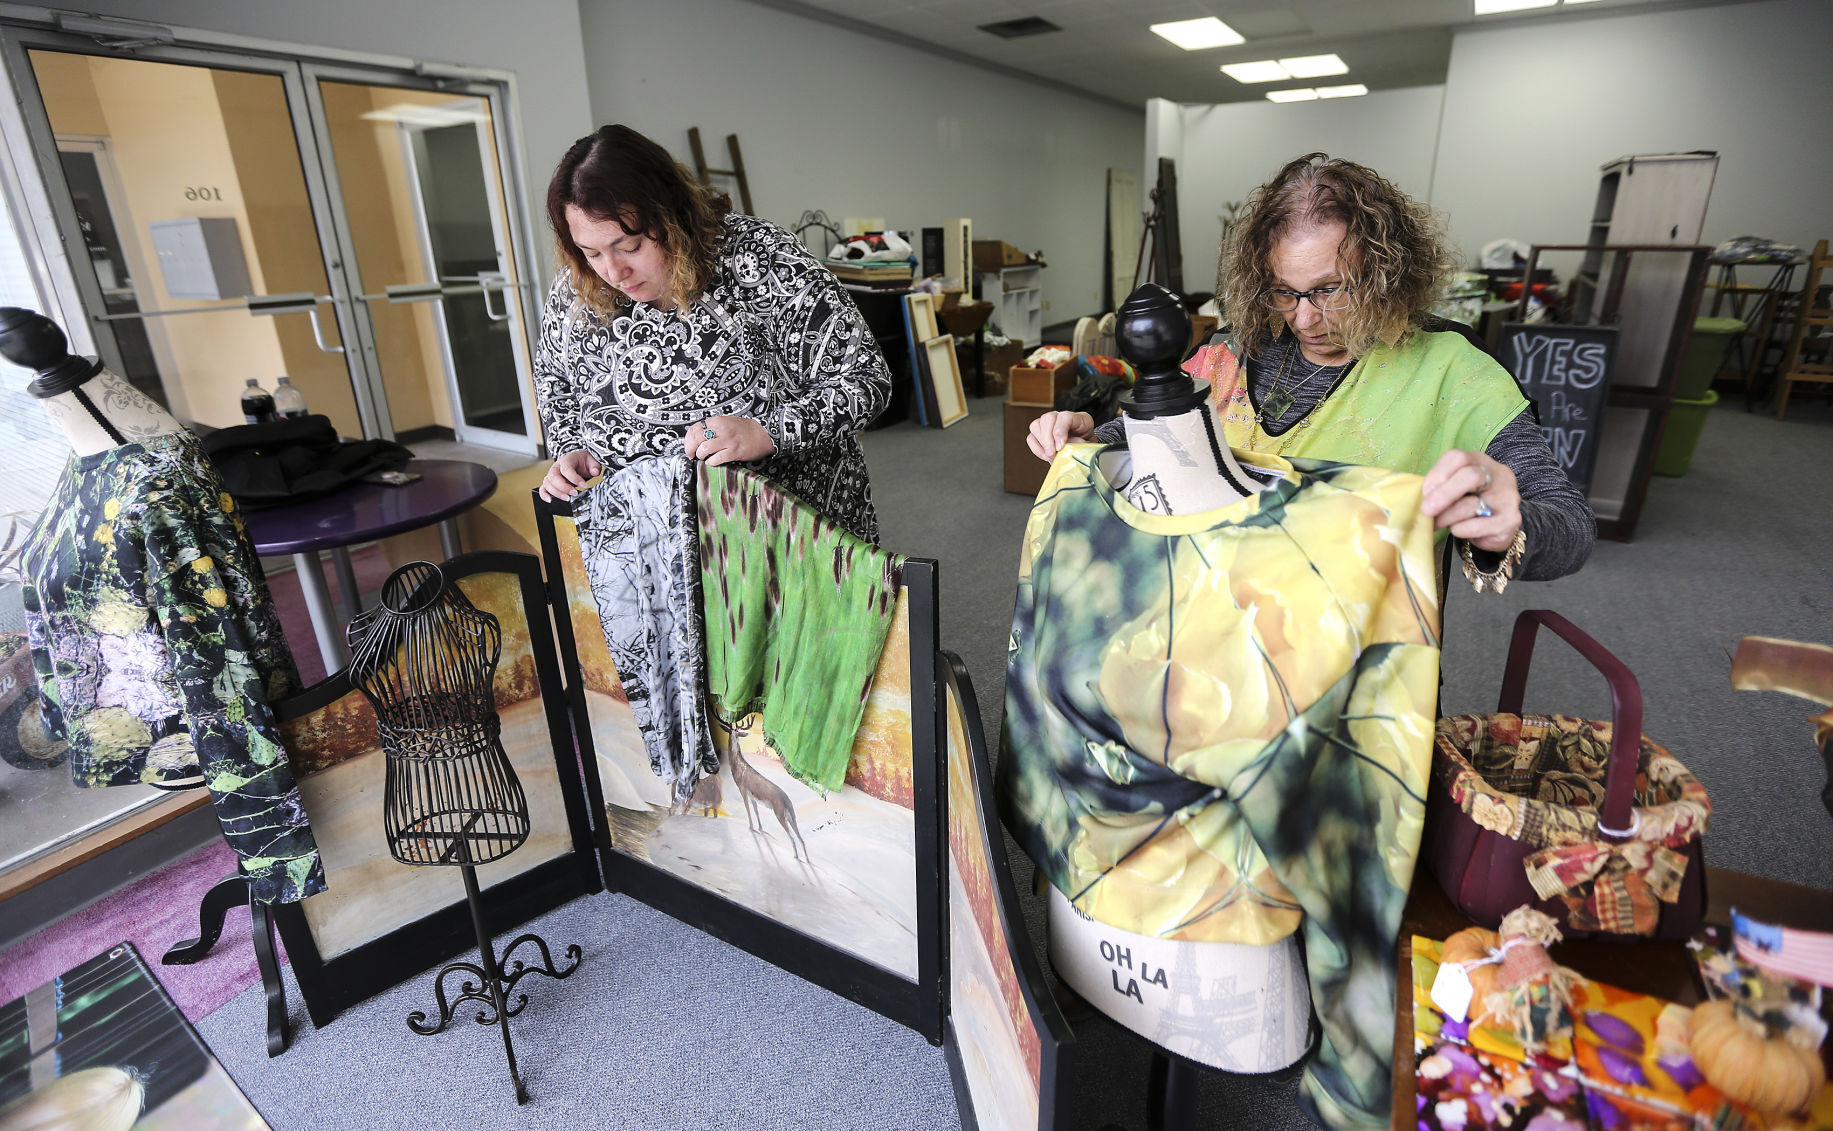 Mercantile on Main co-owners Alice Klinkhammer (left) and her mother, Vickie Klinkhammer, work on setting up a window display in their new location on Main Street in Dubuque. The two plan to open their store in November.    PHOTO CREDIT: Dave Kettering